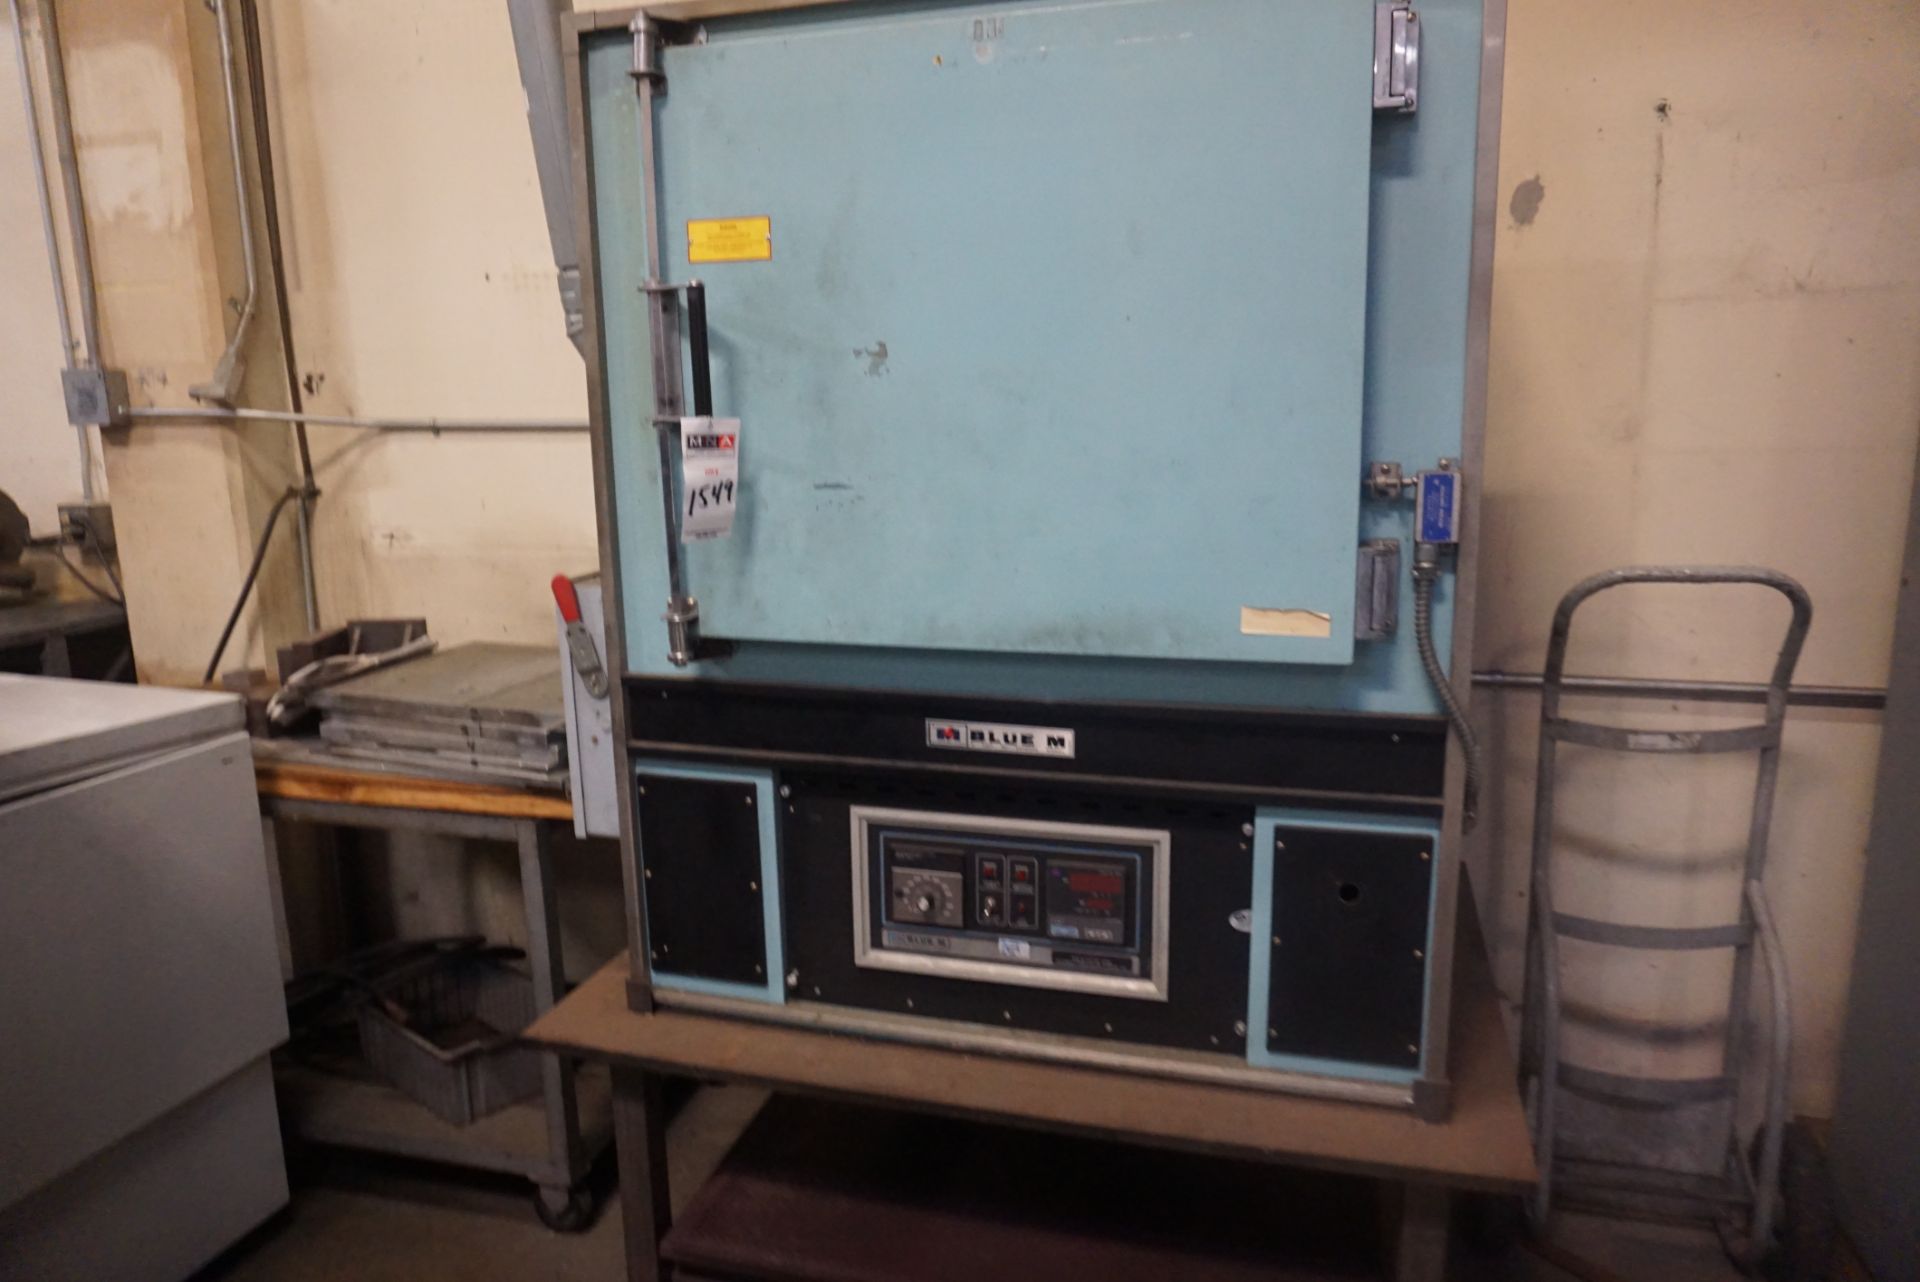 Blue M DC256C 650 Degree Max. Temp. Convection Oven, s/n DC3476 - Image 2 of 5